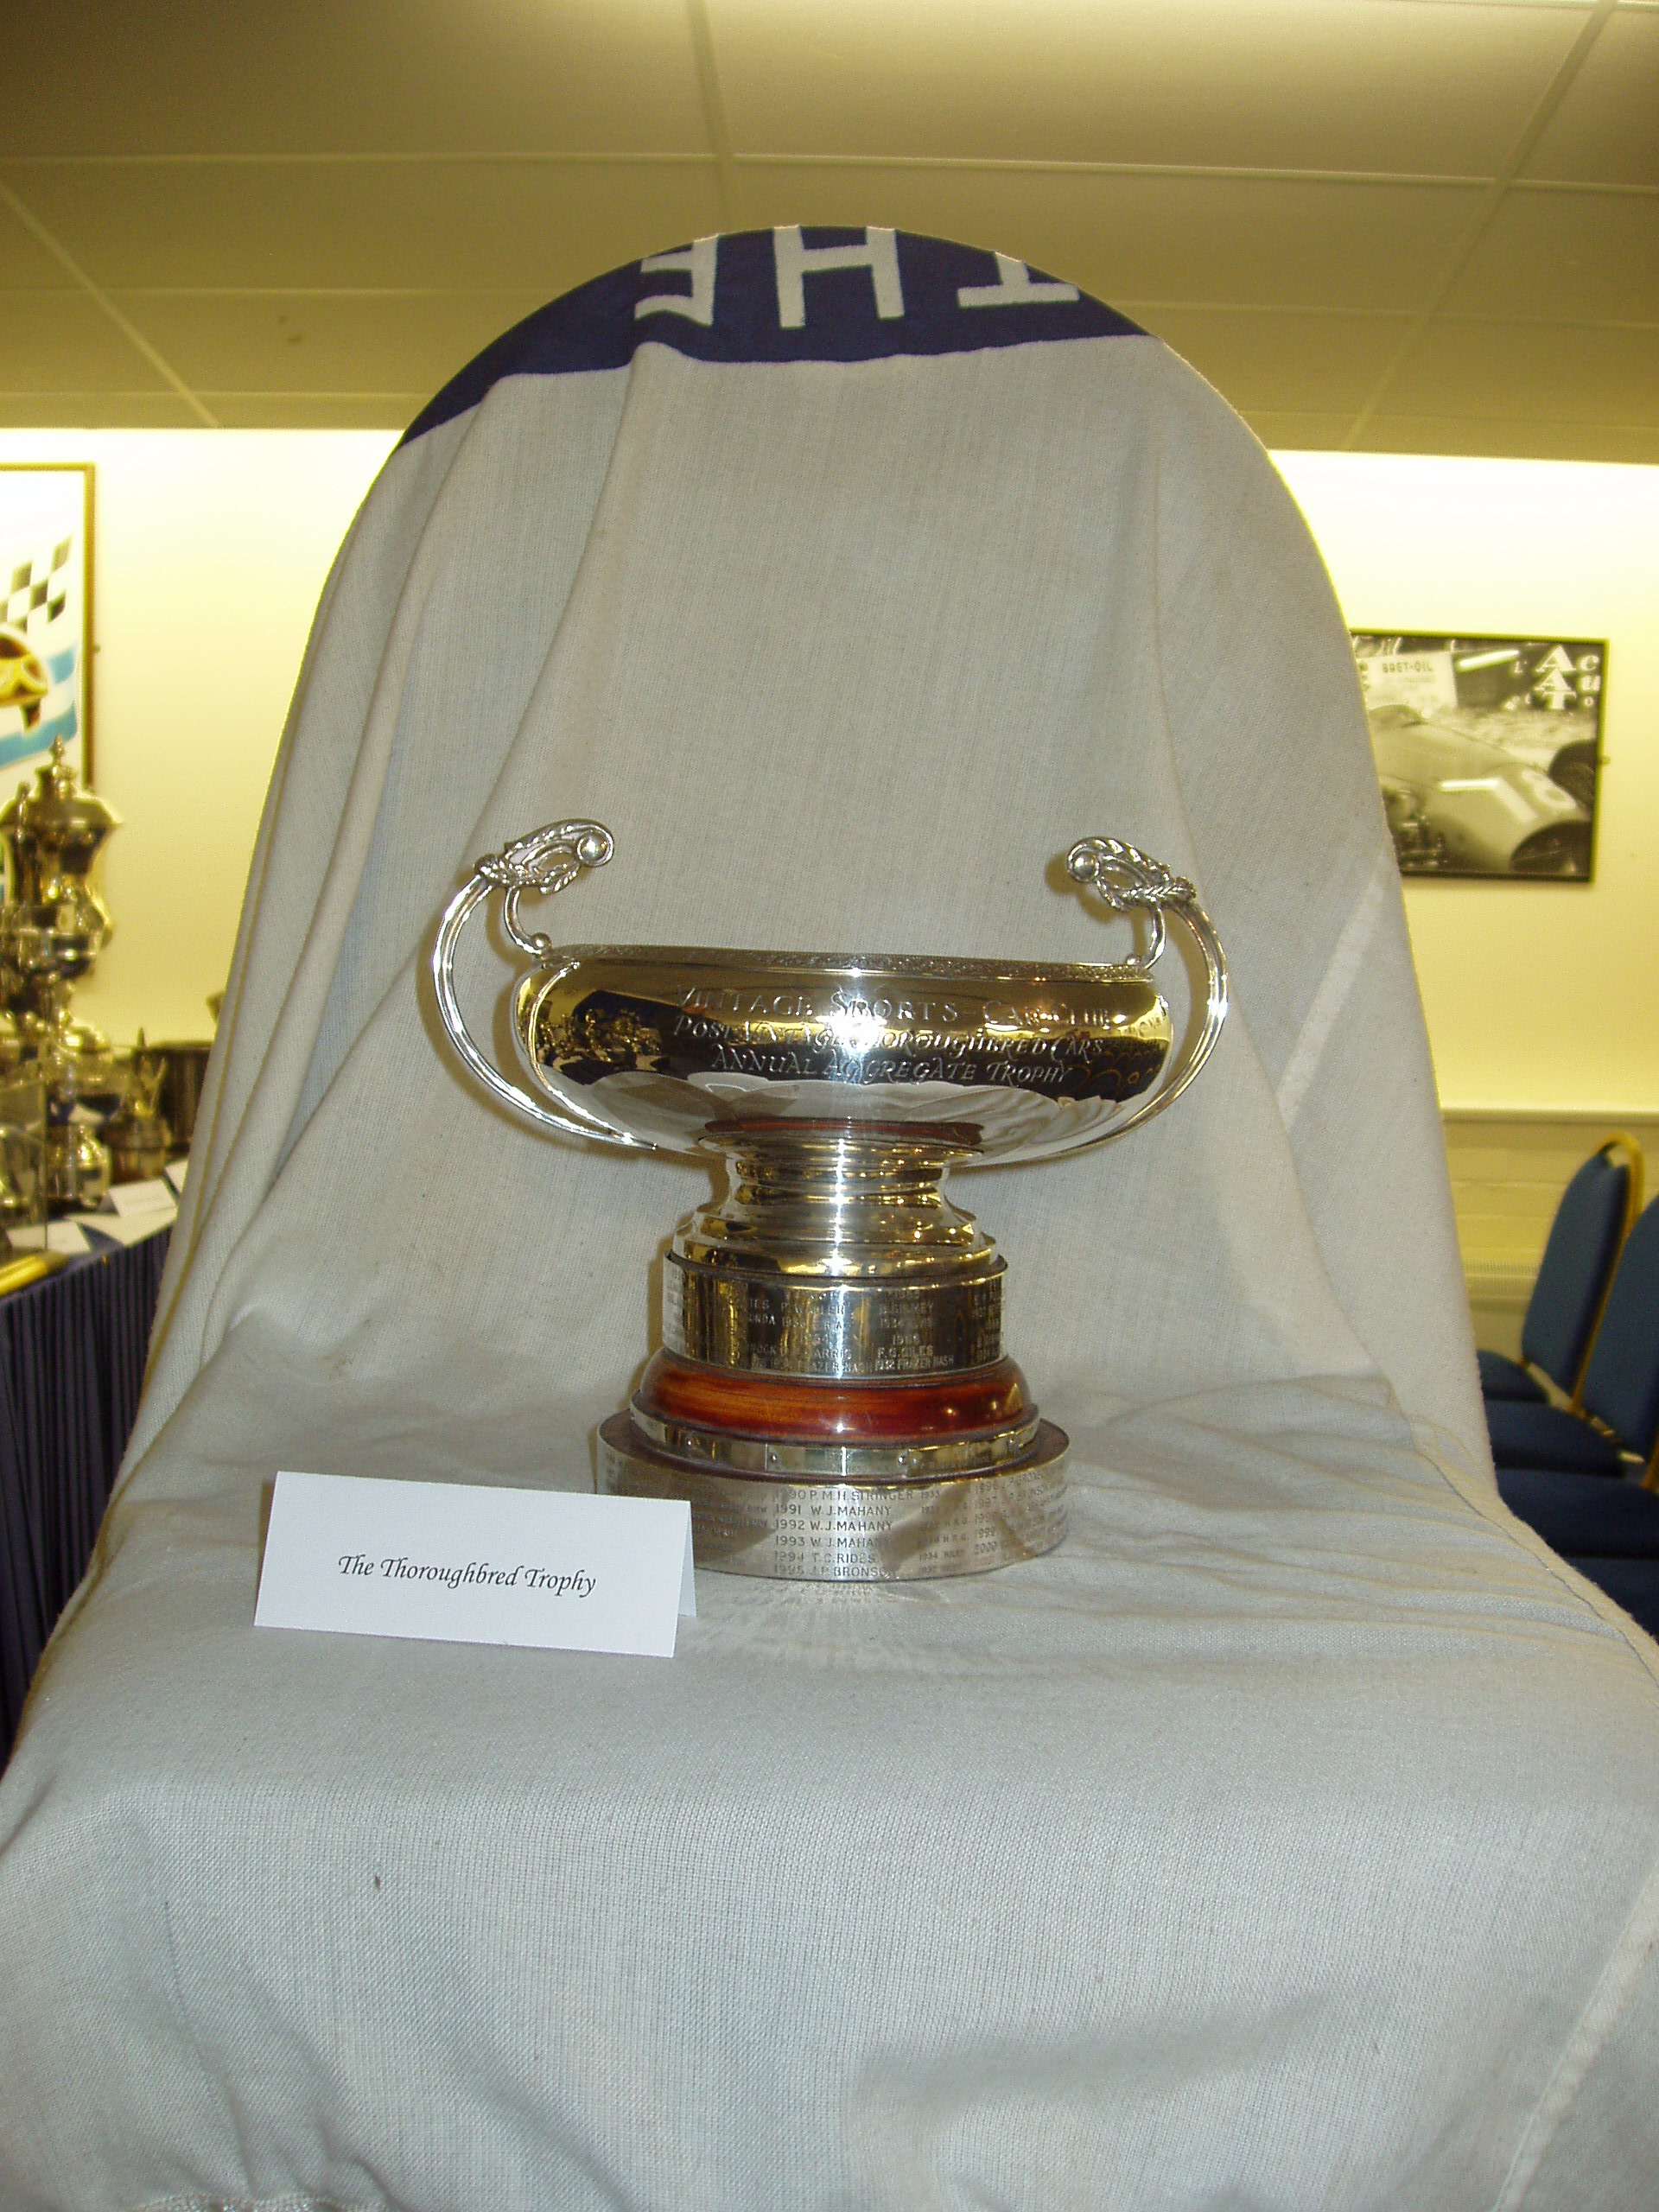 THOROUGHBRED TROPHY cover